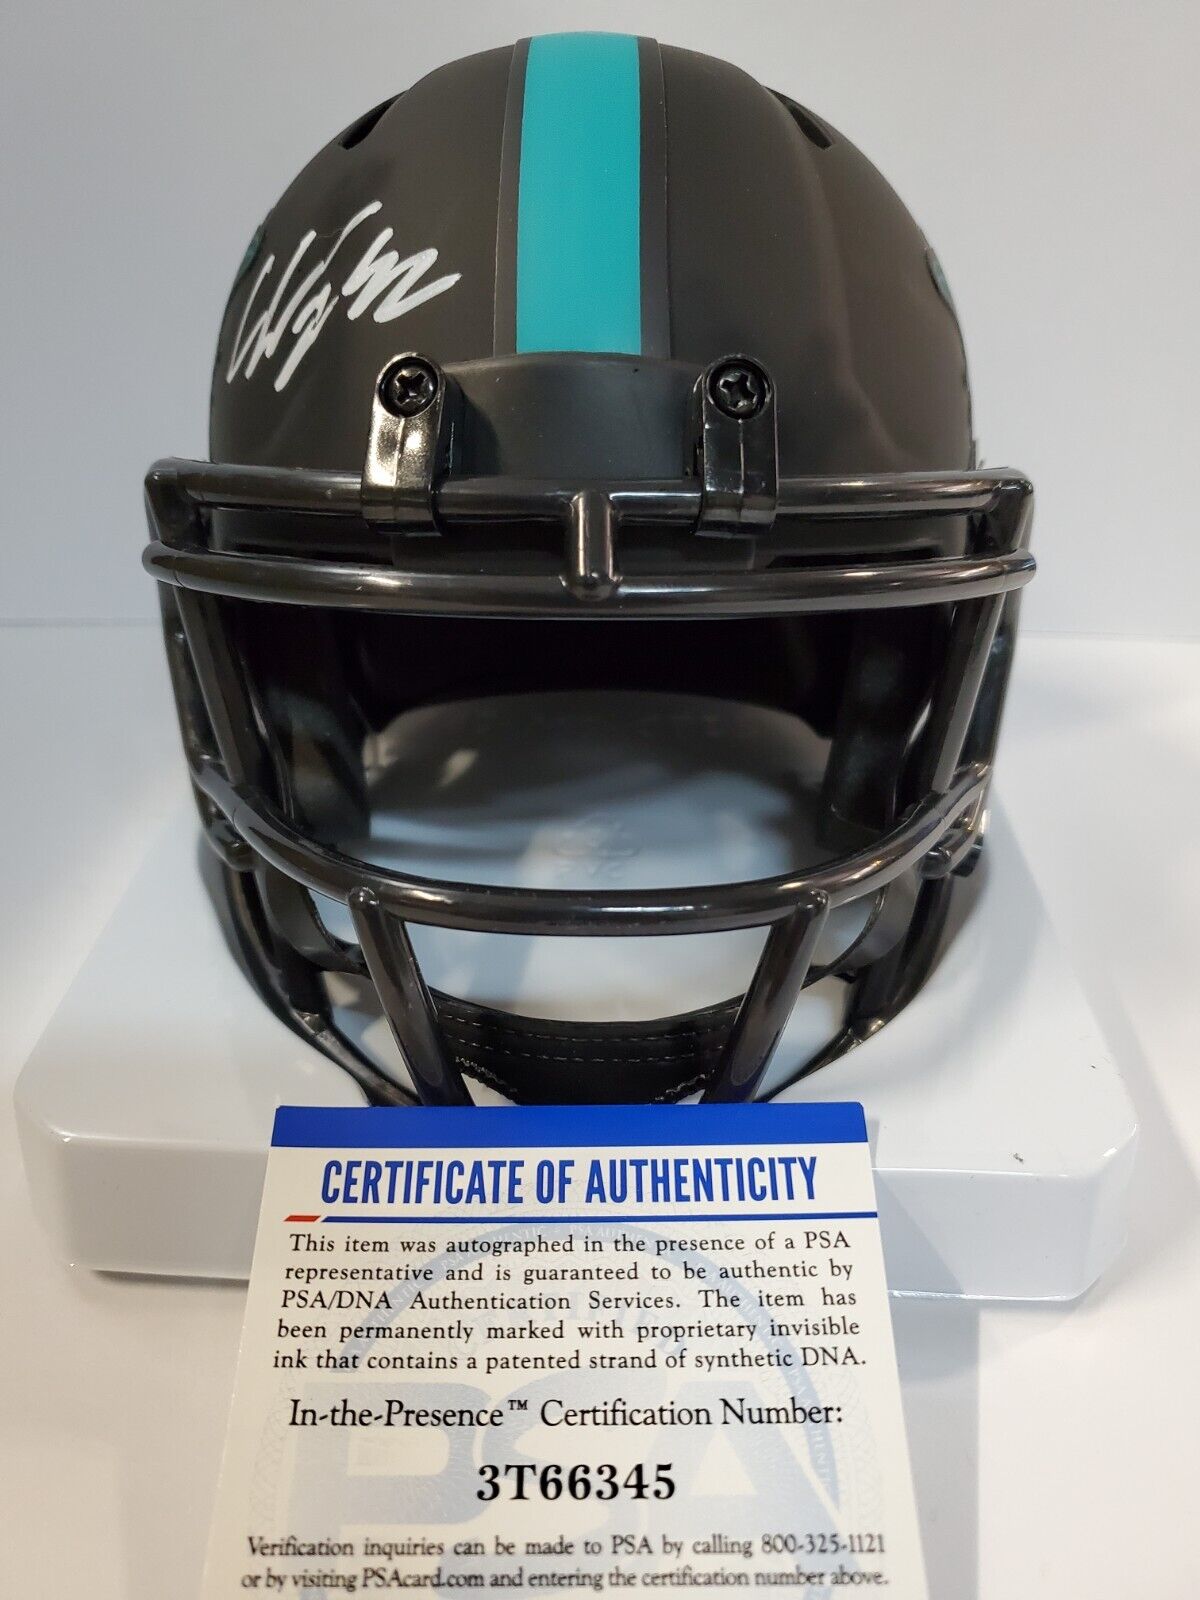 MVP Authentics Miami Dolphins Christian Wilkins Autographed Signed Eclipse Mini Helmet Psa Coa 99 sports jersey framing , jersey framing